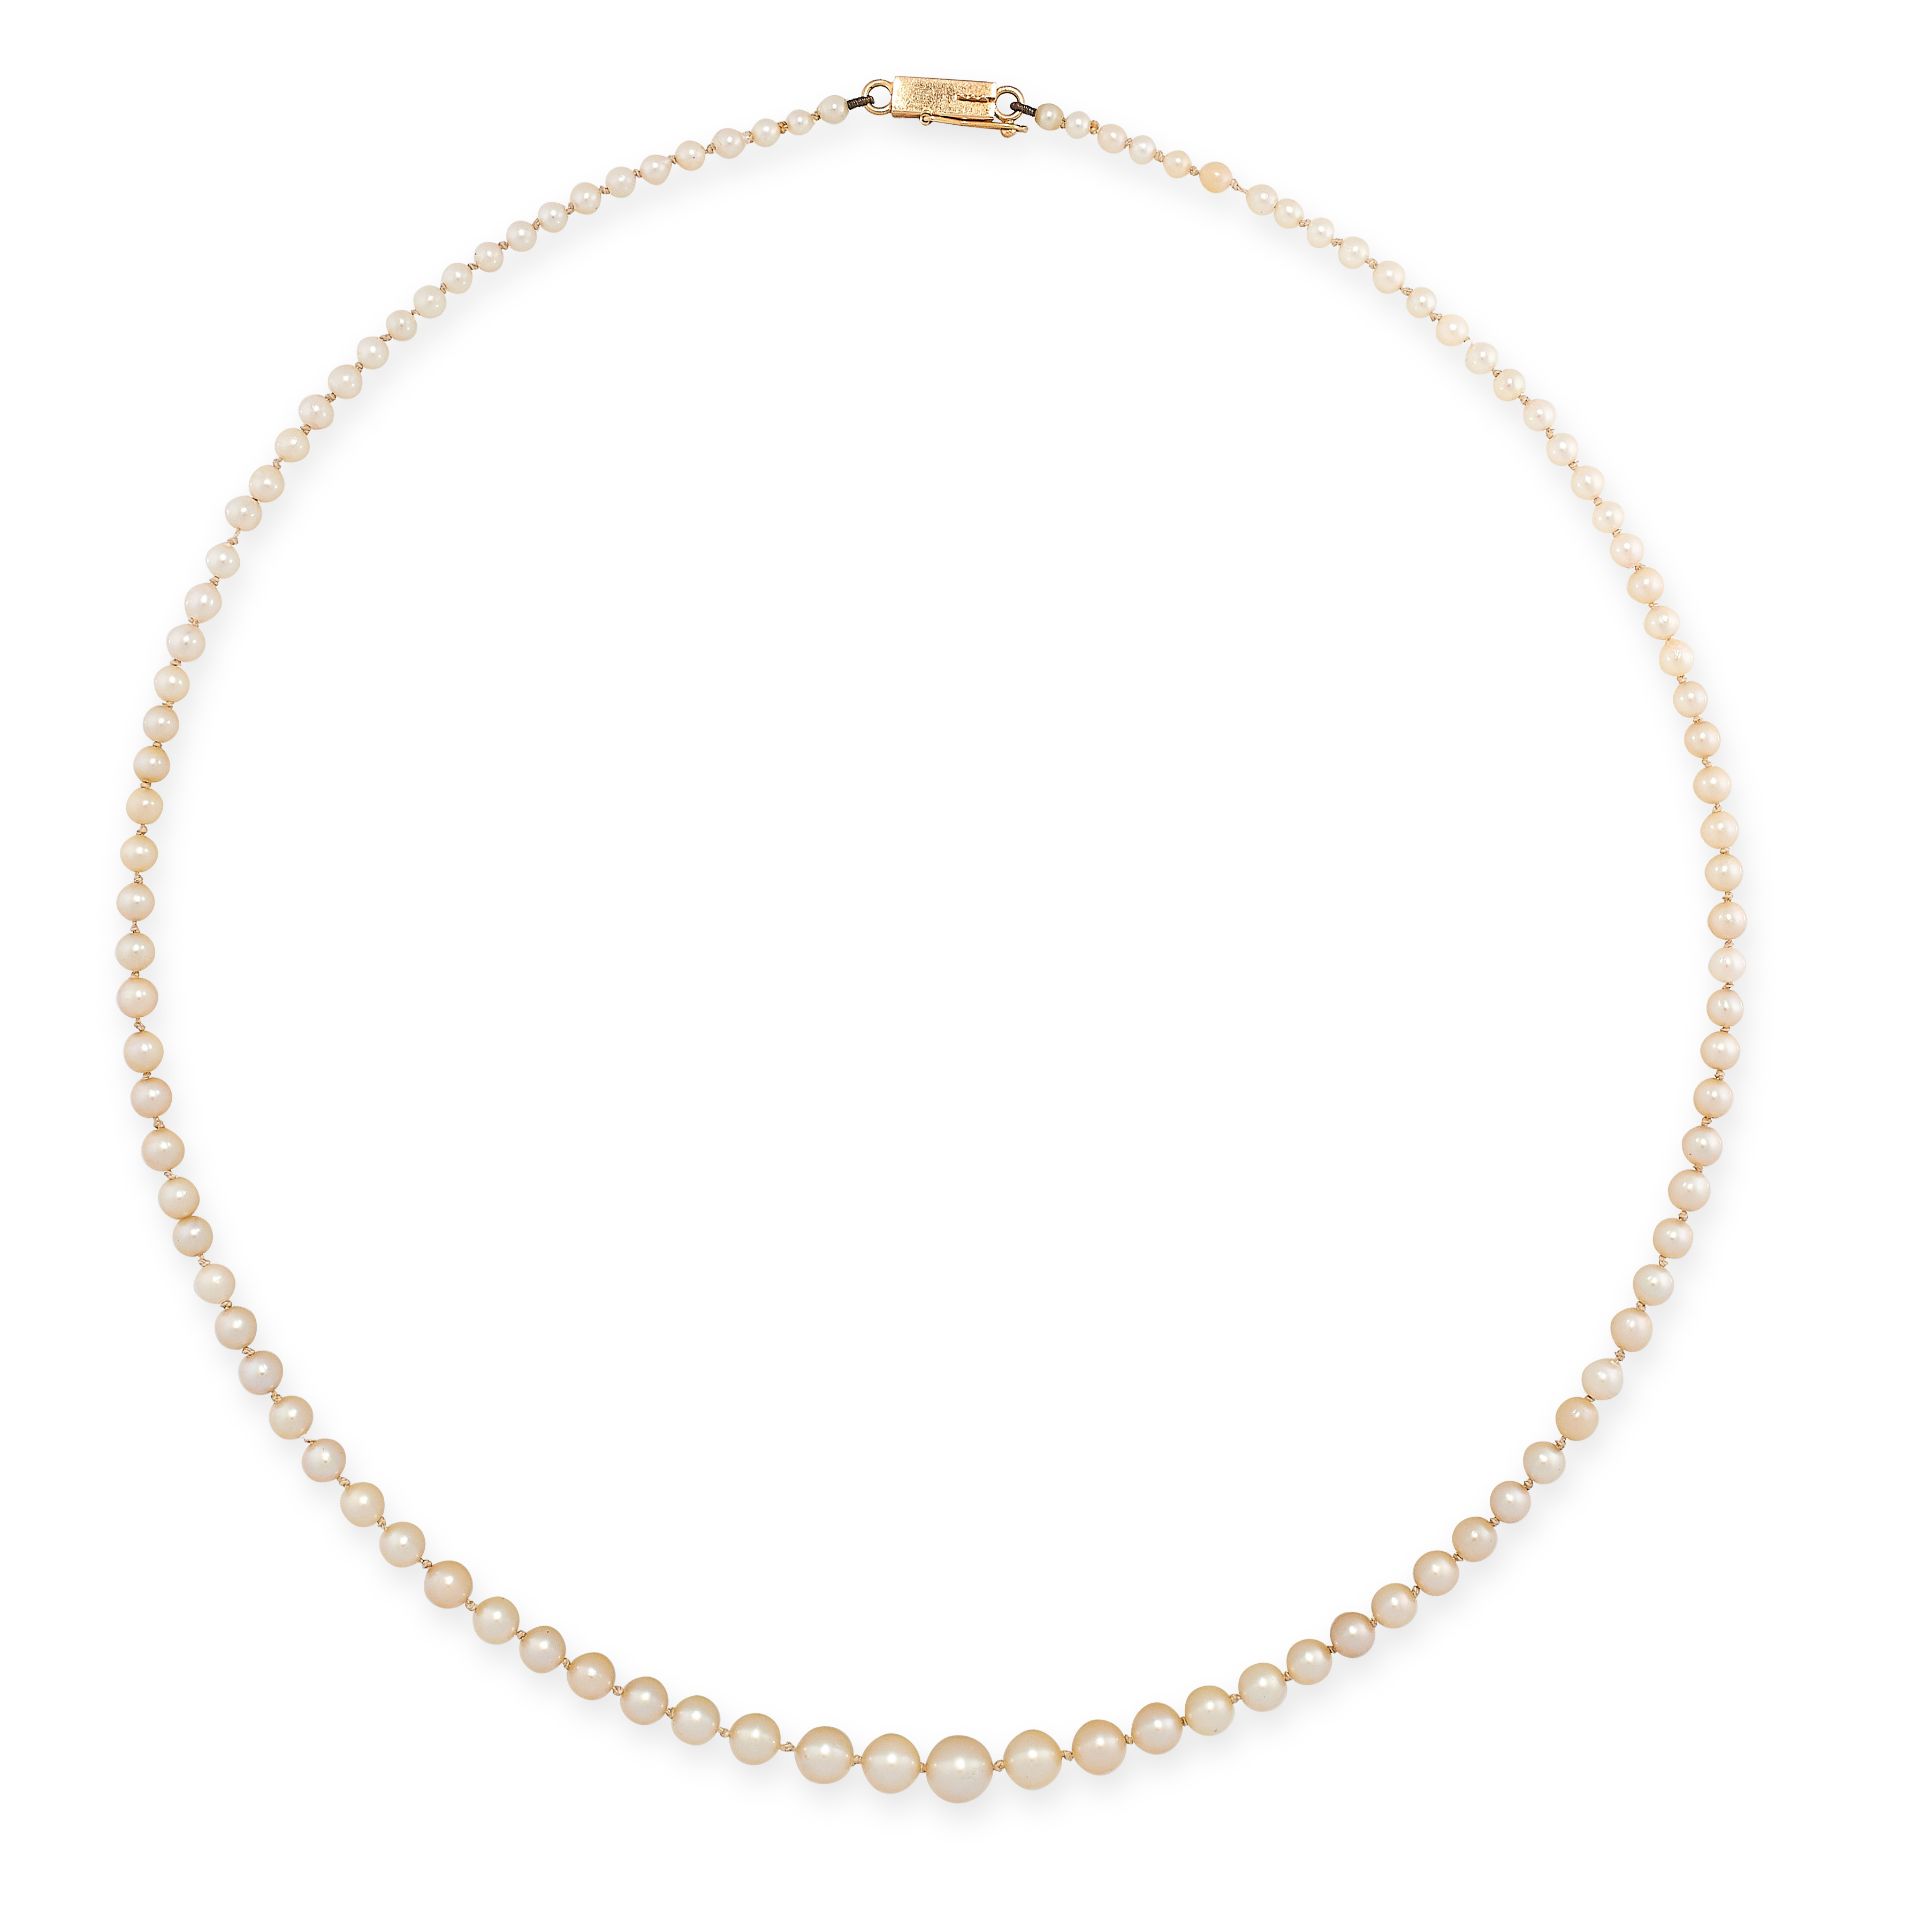 PEARL NECKLACE comprising of a single row of pearls ranging from 2.6mm-6.2mm in diameter, stamped